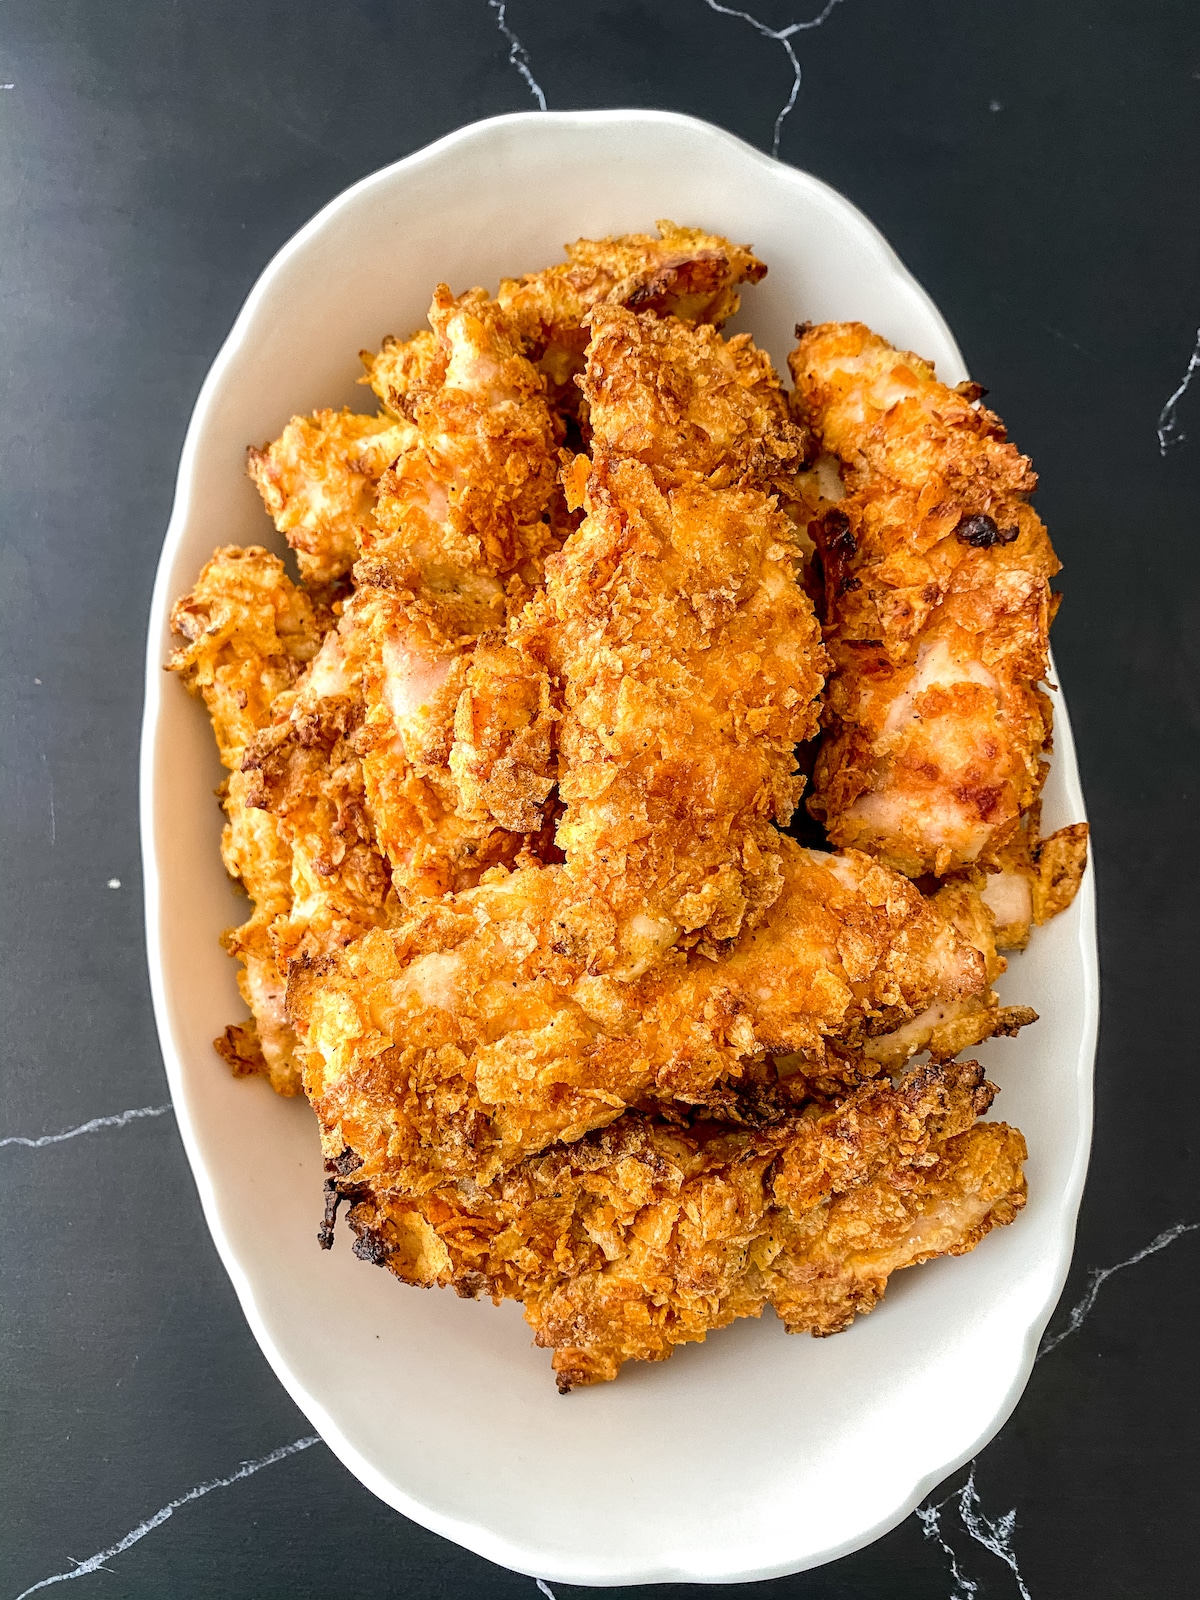 Large white oval bowl filled with chicken tenders